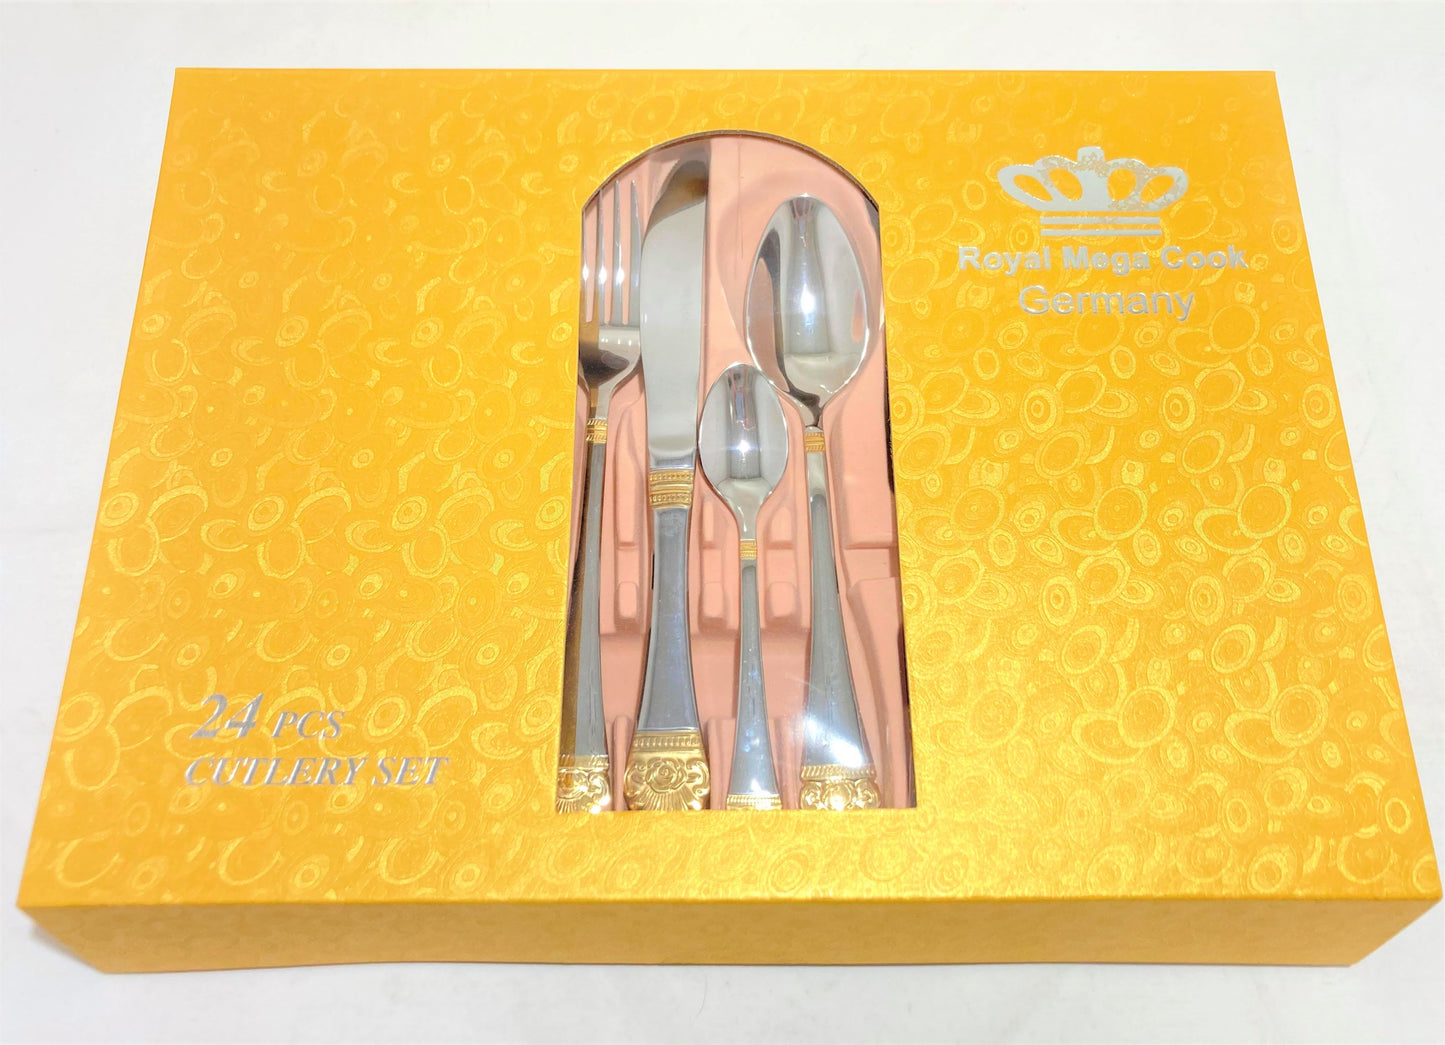 24 PC Flower Design Stainless Steel Silver & Gold Cutlery Set